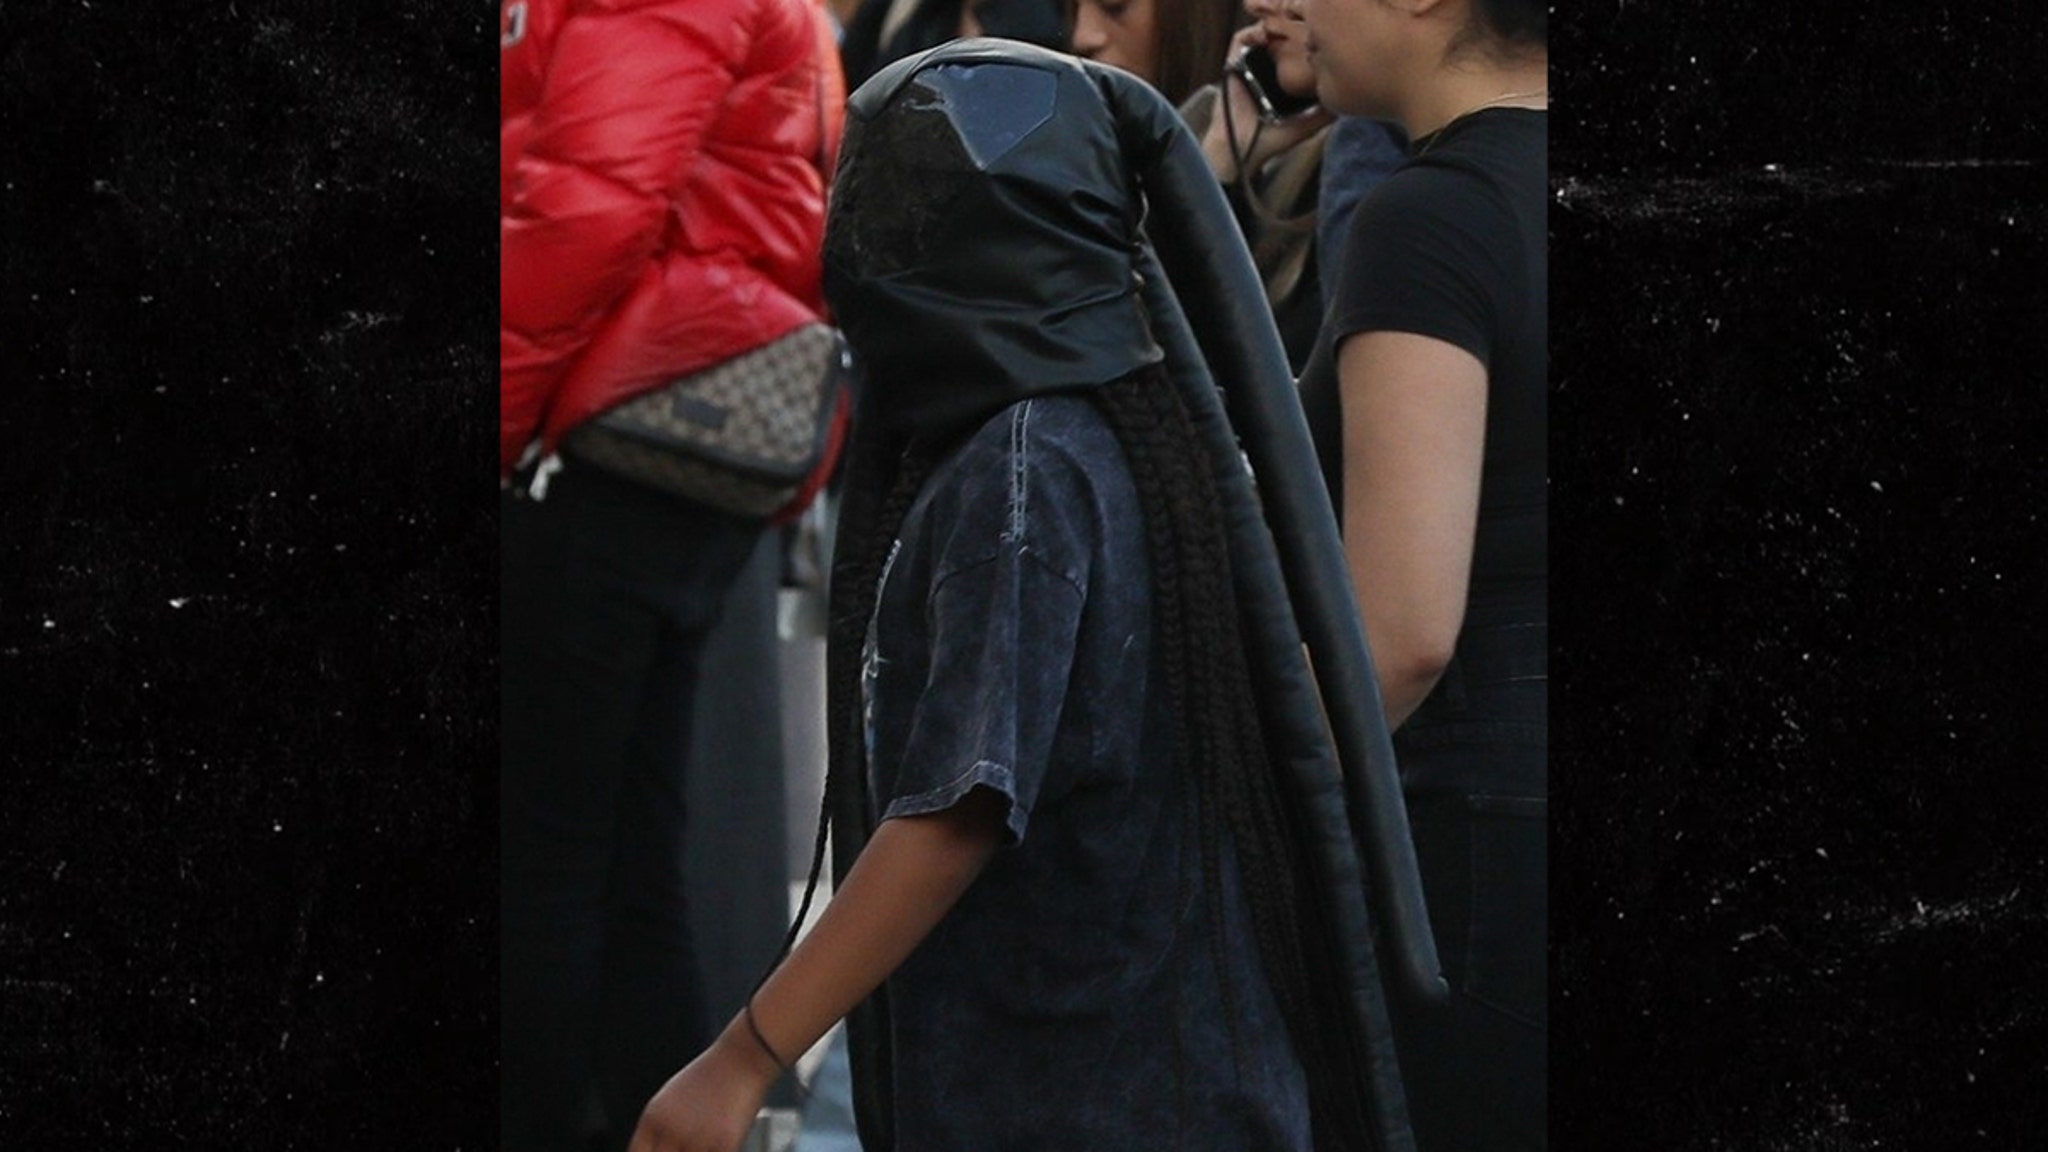 North West Wears Full Leather Face Mask in Paris During Fashion Week - TMZ